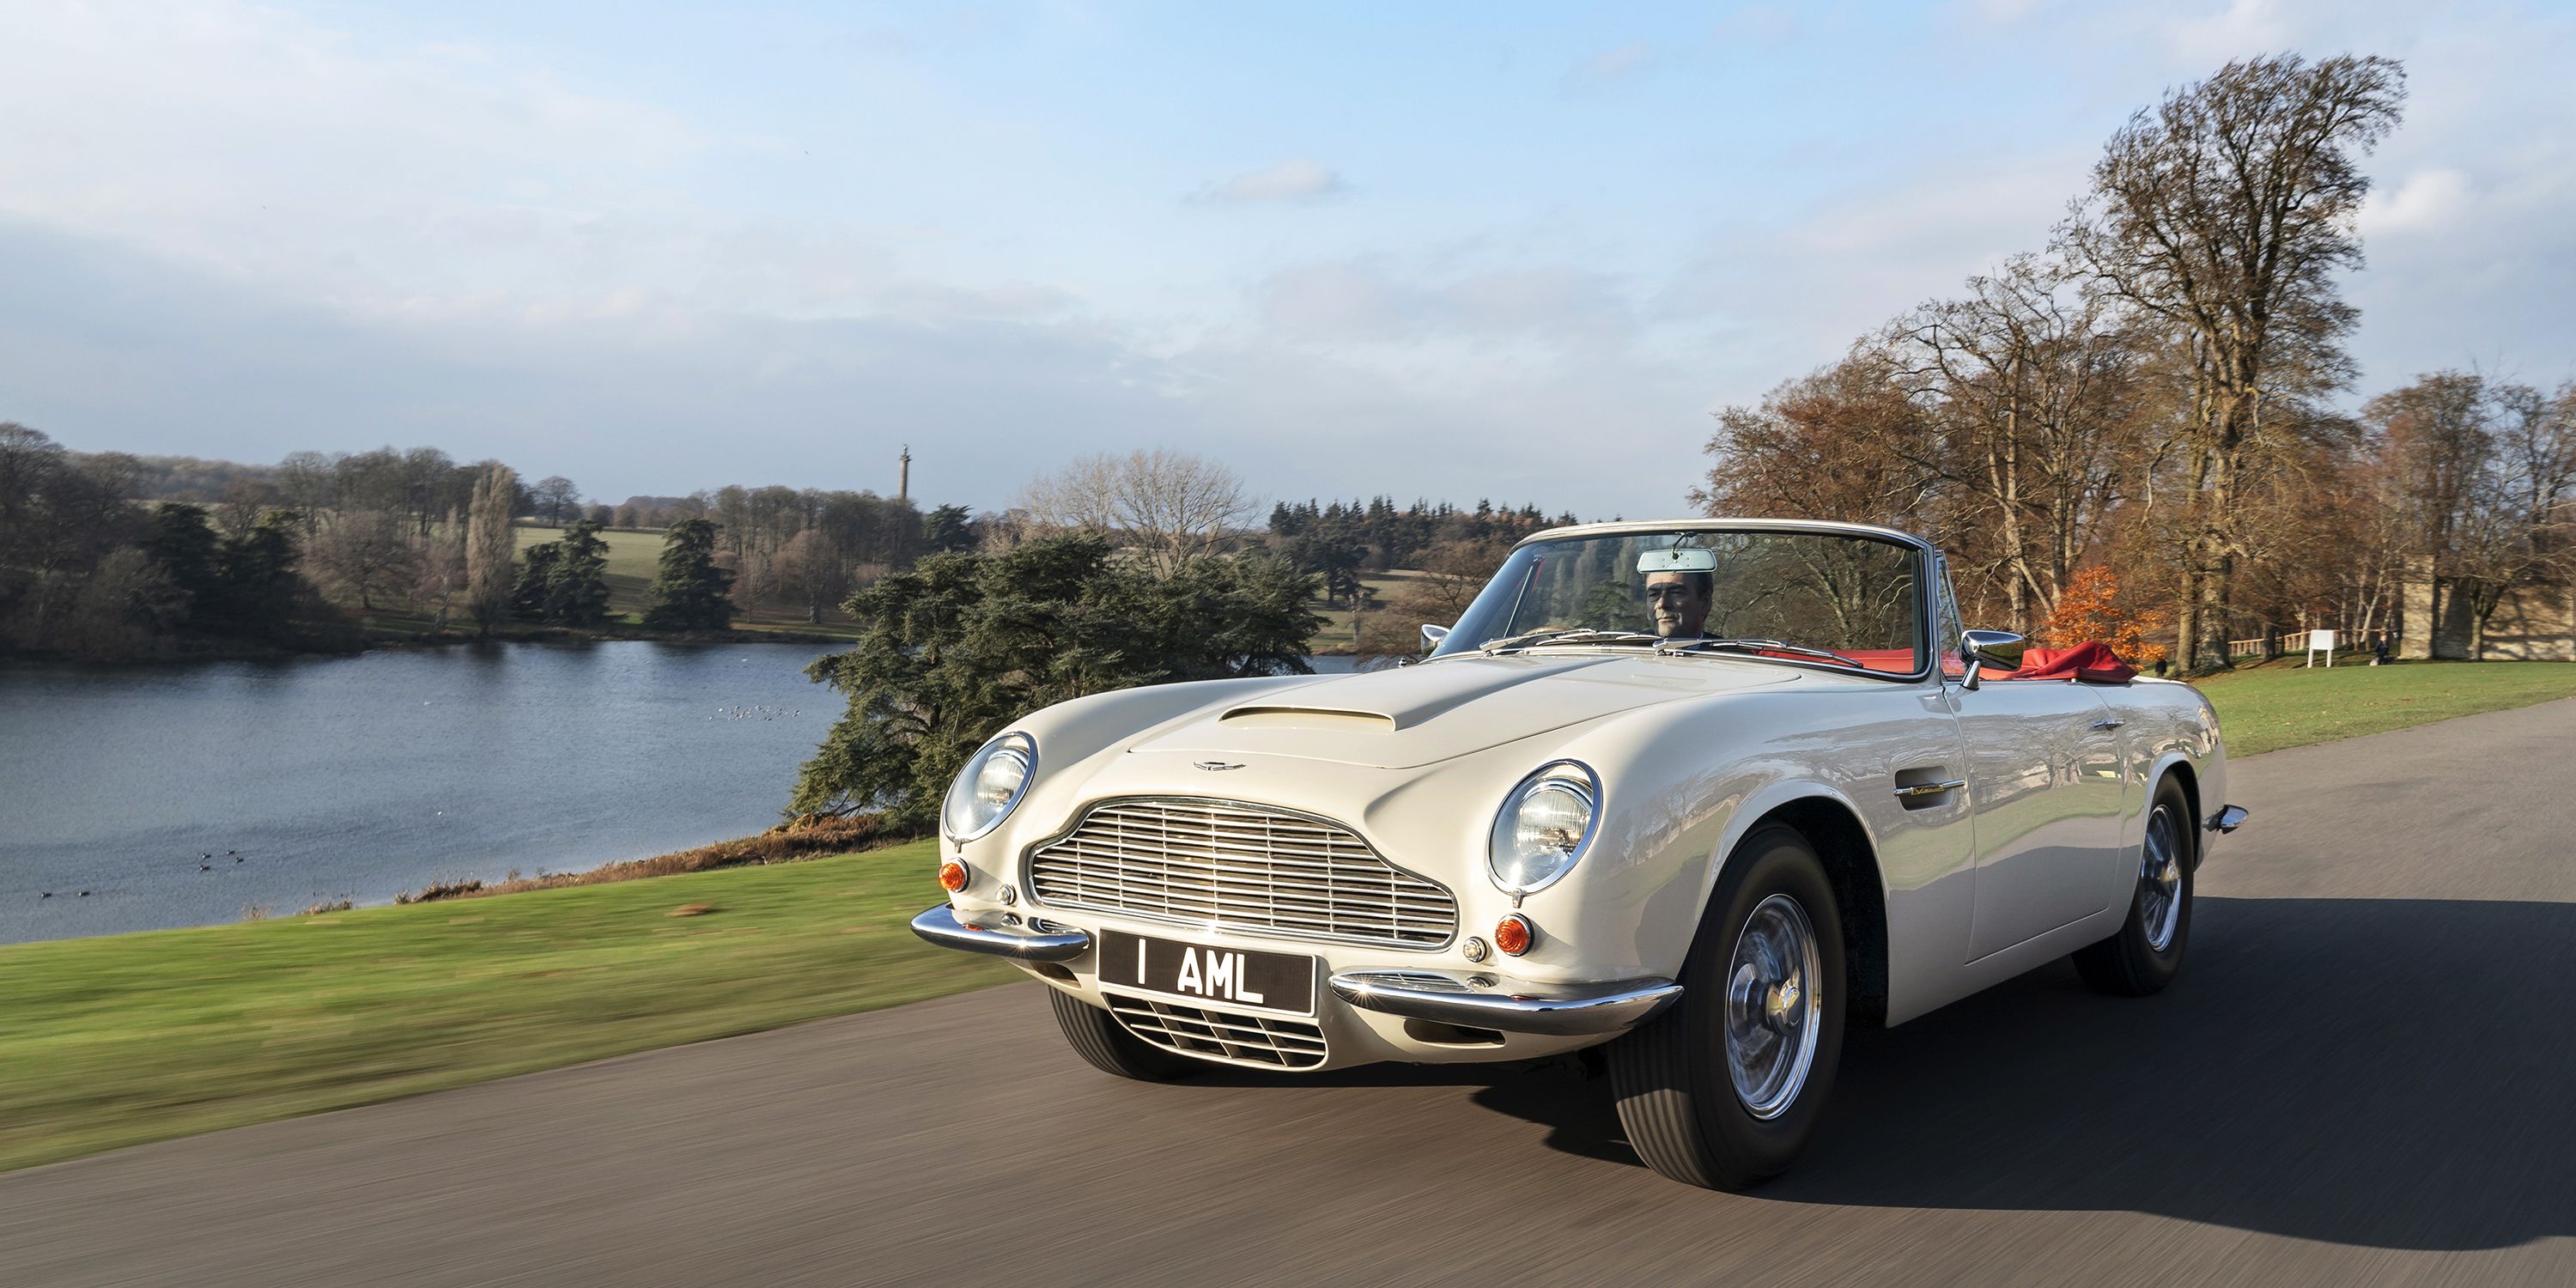 Aston Martin S Electric Conversion Kit For Classic Cars Is Very Clever